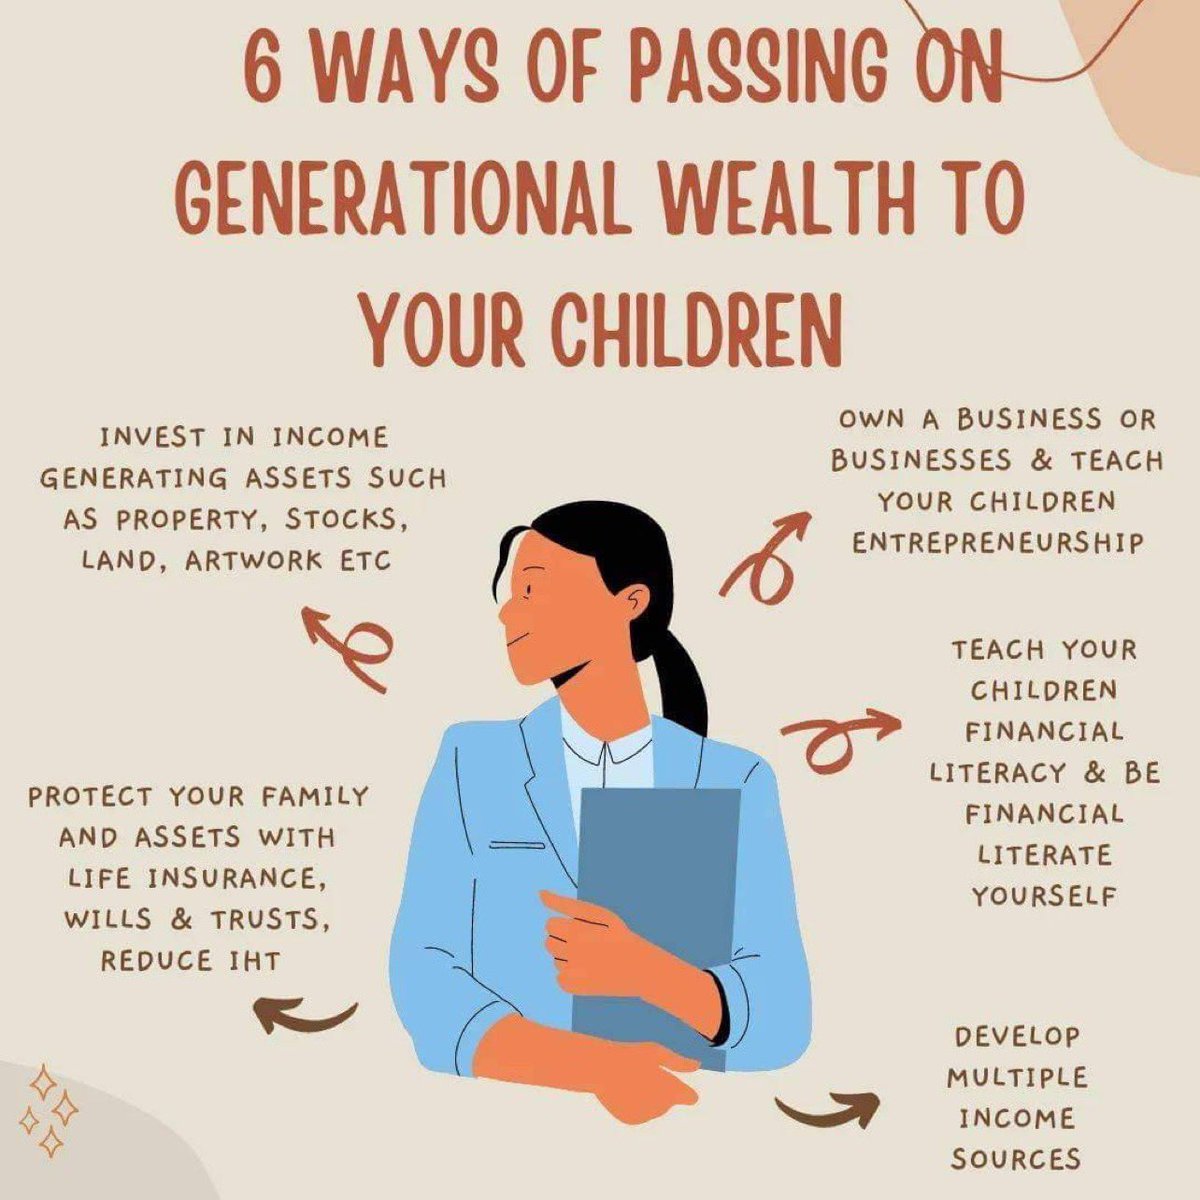 Repost from @blackhistorystudies
•
How do you plan to pass on generational wealth??? 

#generationalwealth #generationalwealthbuilding #financegoals #personalfinance #financialeducation #economicempowerment #blackwealth #blackwealthmatters #blackfamily #blackwealthbuilders